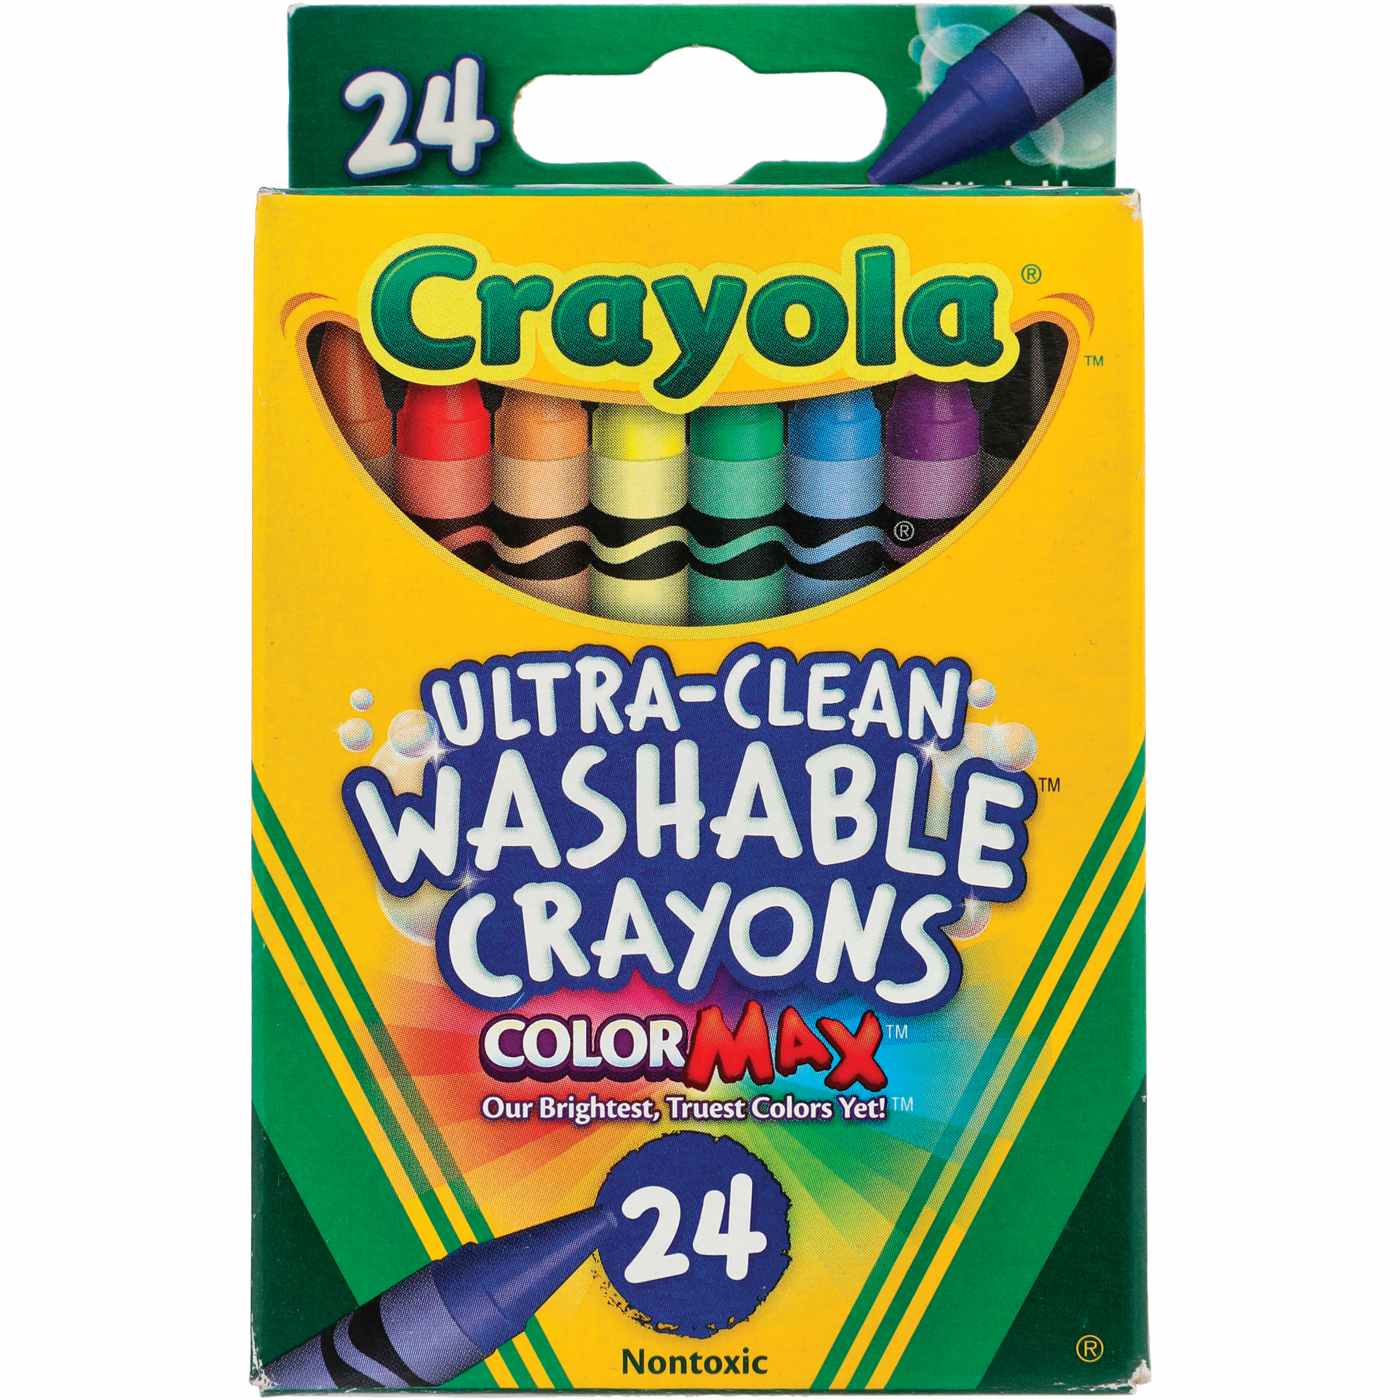 Crayola Ultra-Clean Washable Crayons; image 1 of 2